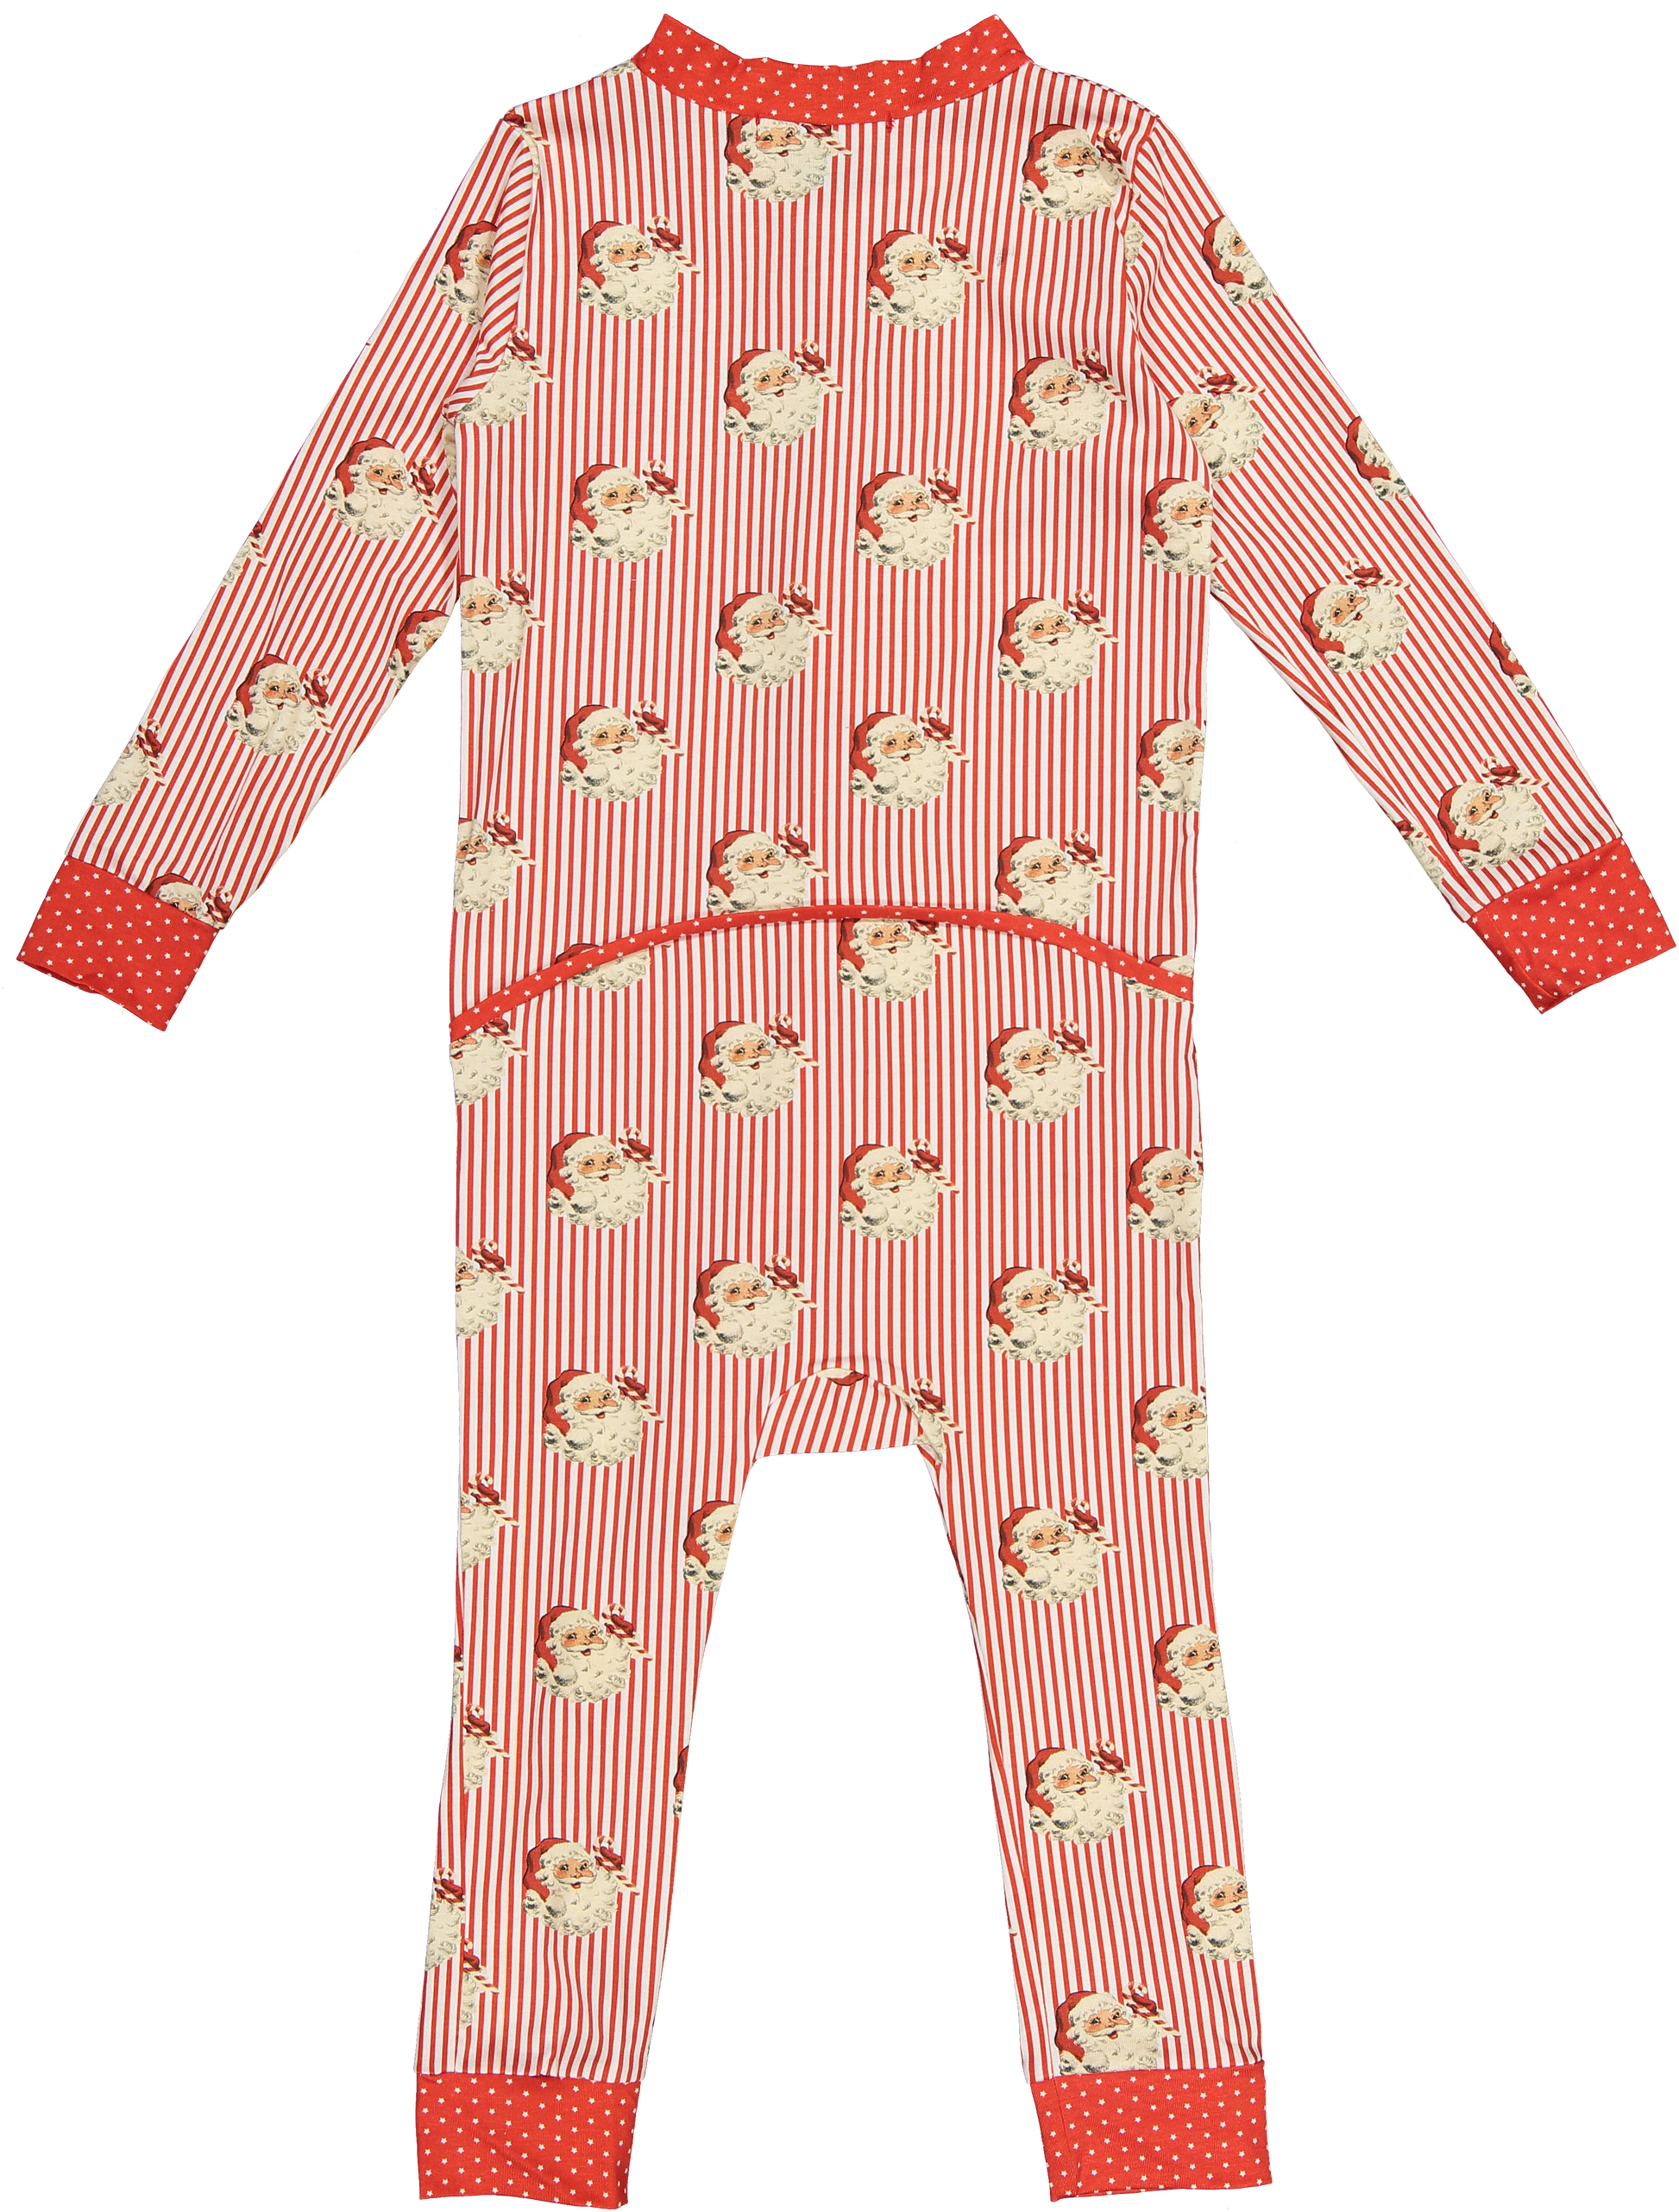 Red and white striped Classic Santa pajamas by Sal & Pimenta with red polka dot trim and zipper enclosure.